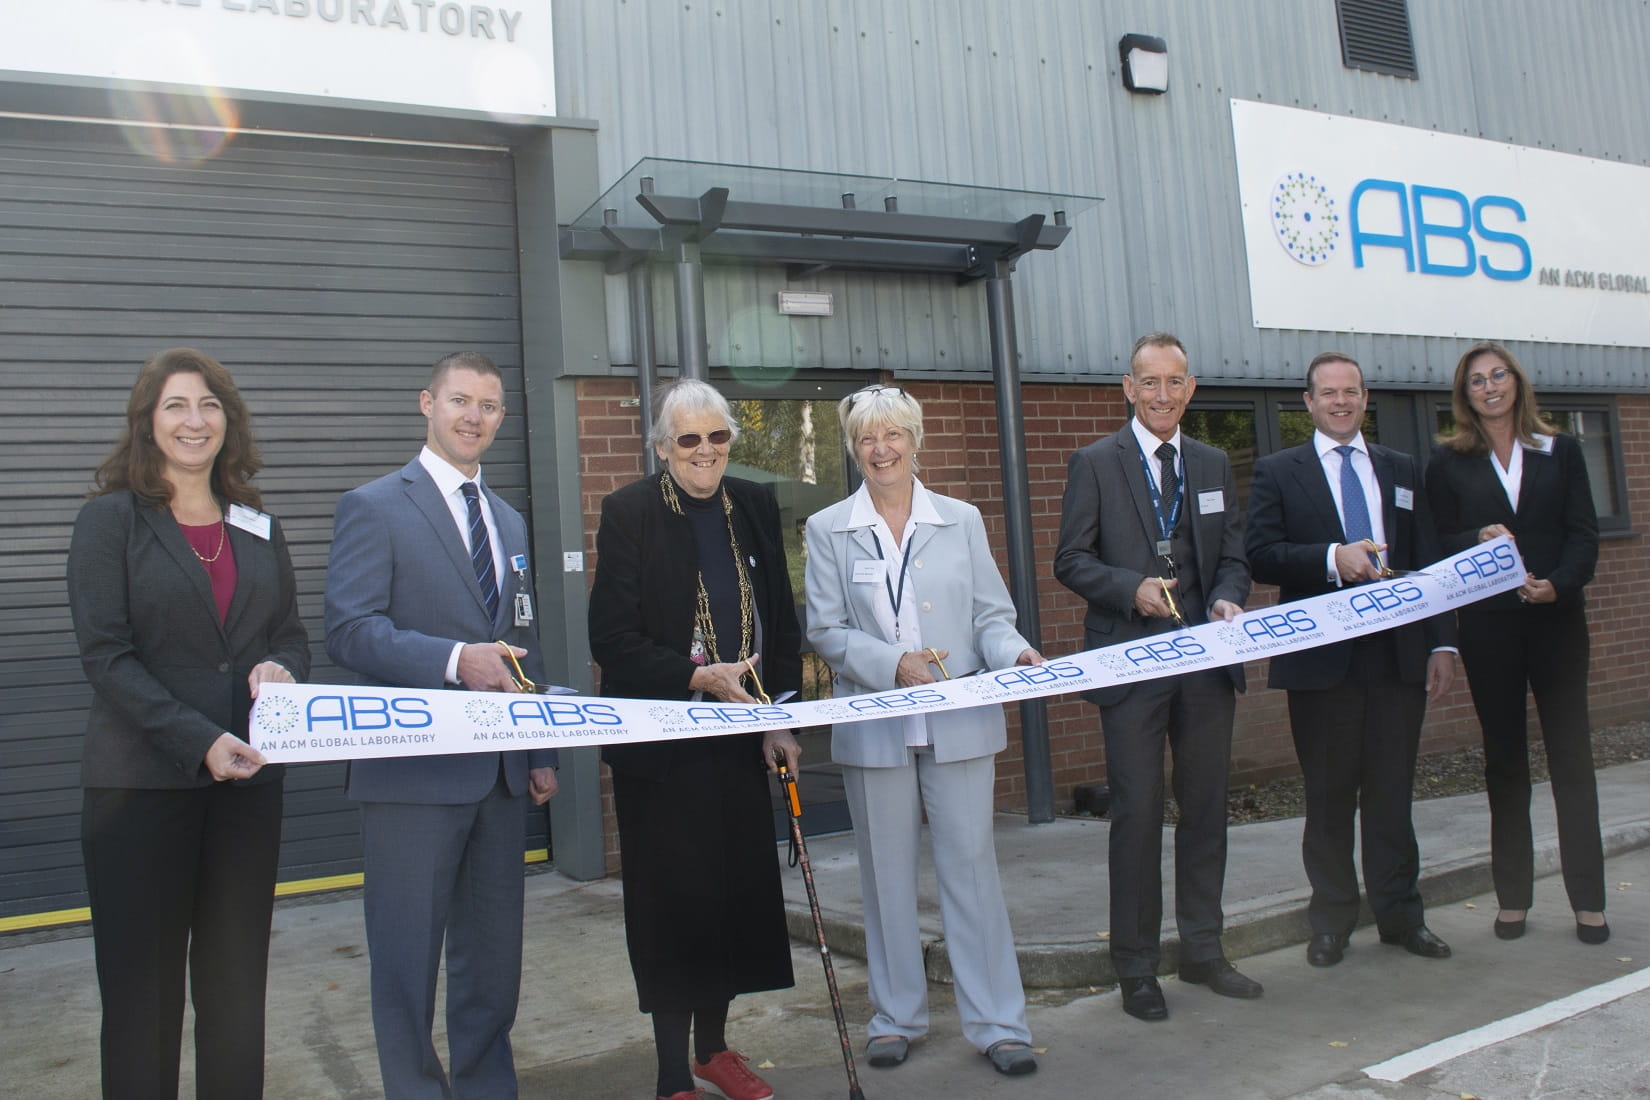 Ribbon Cutting of ABS Laboratories in York